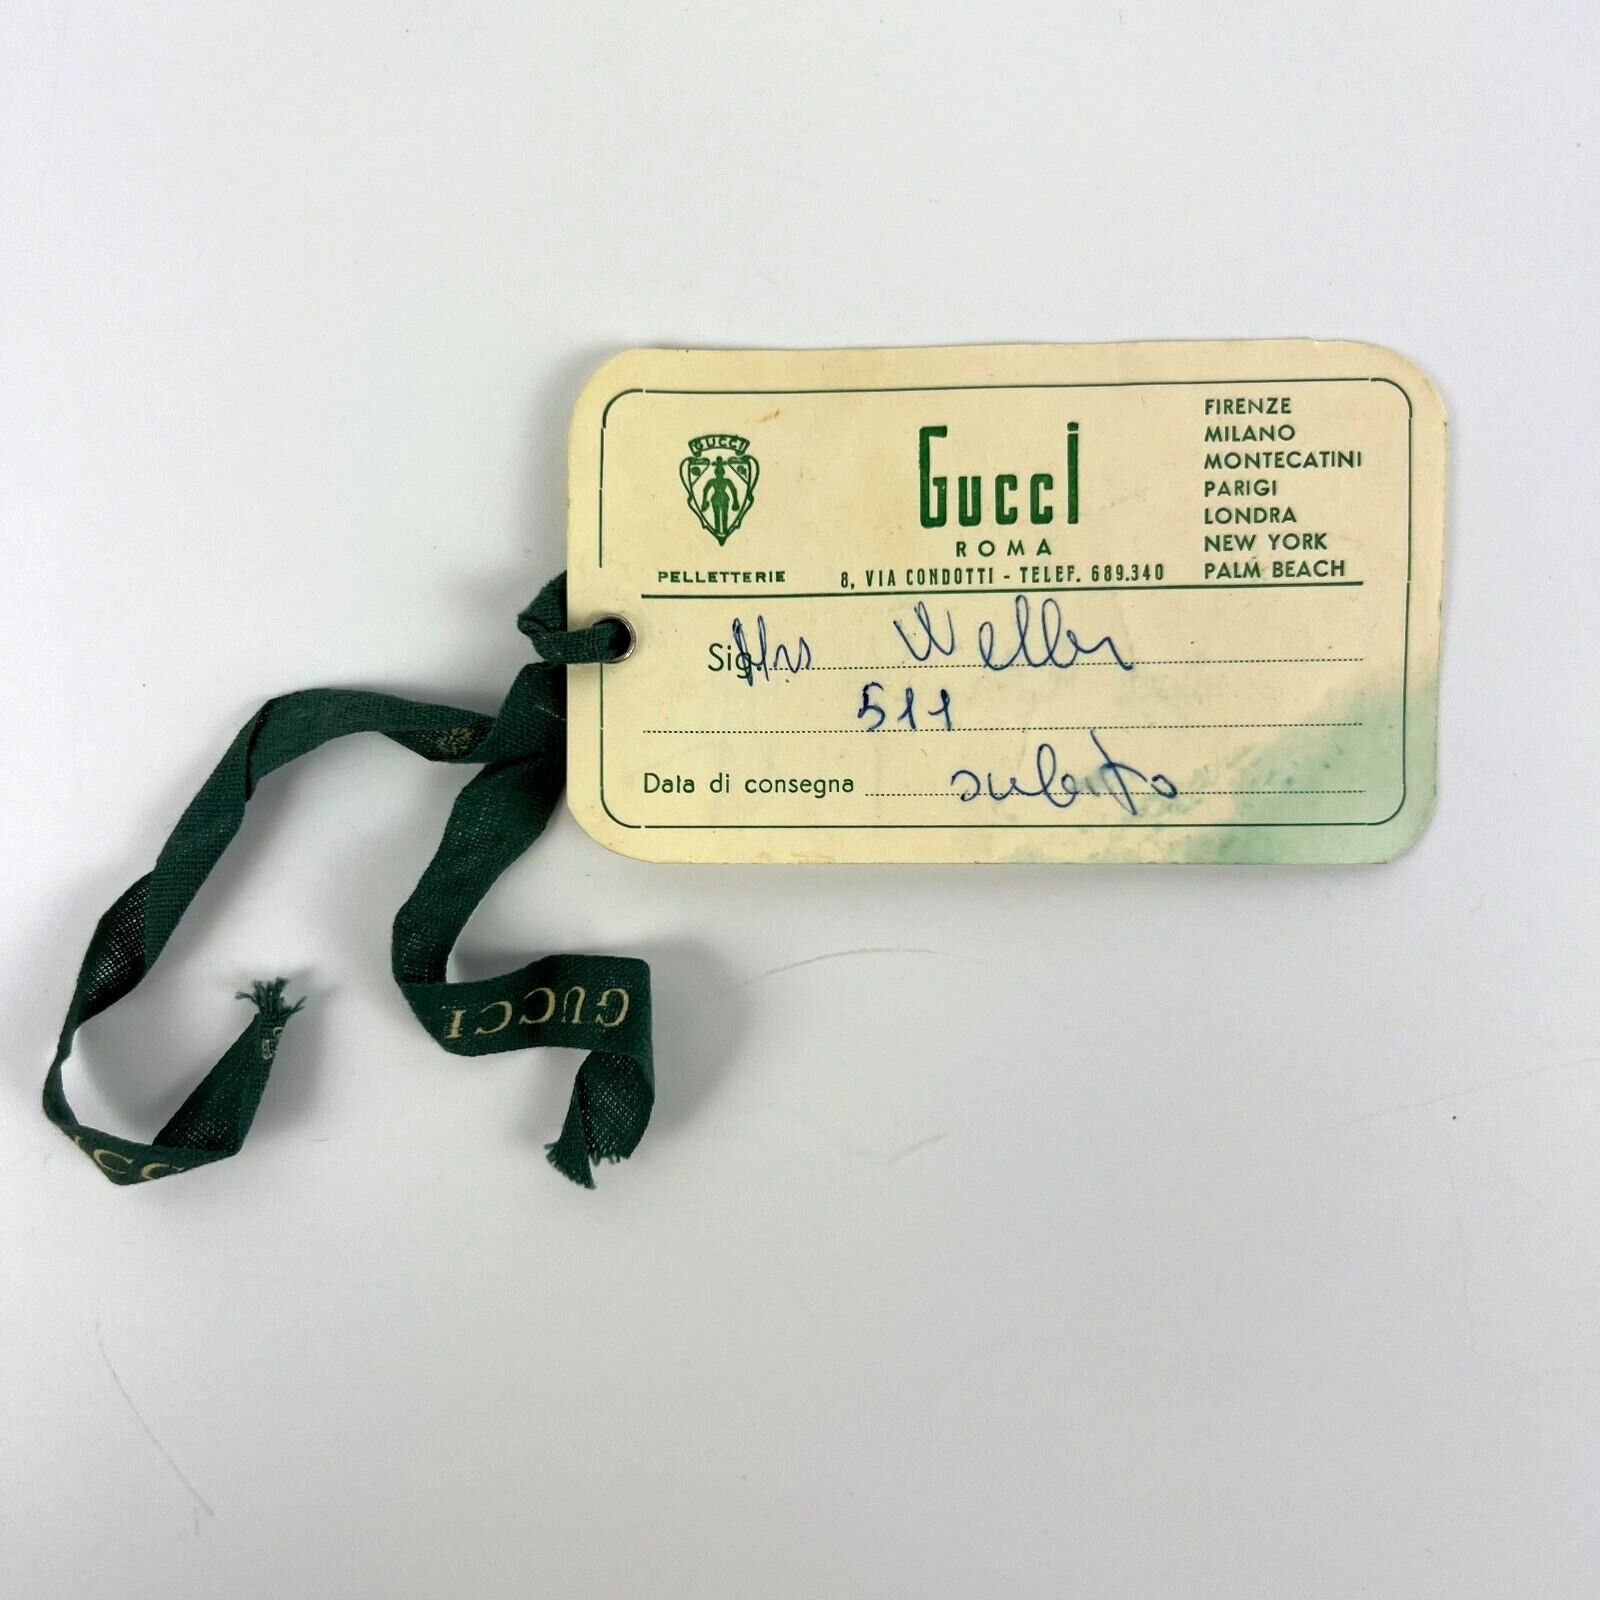 Vintage Gucci Roma Memorabilia Leather Store Proof of Purchase Tag Italy 1950s